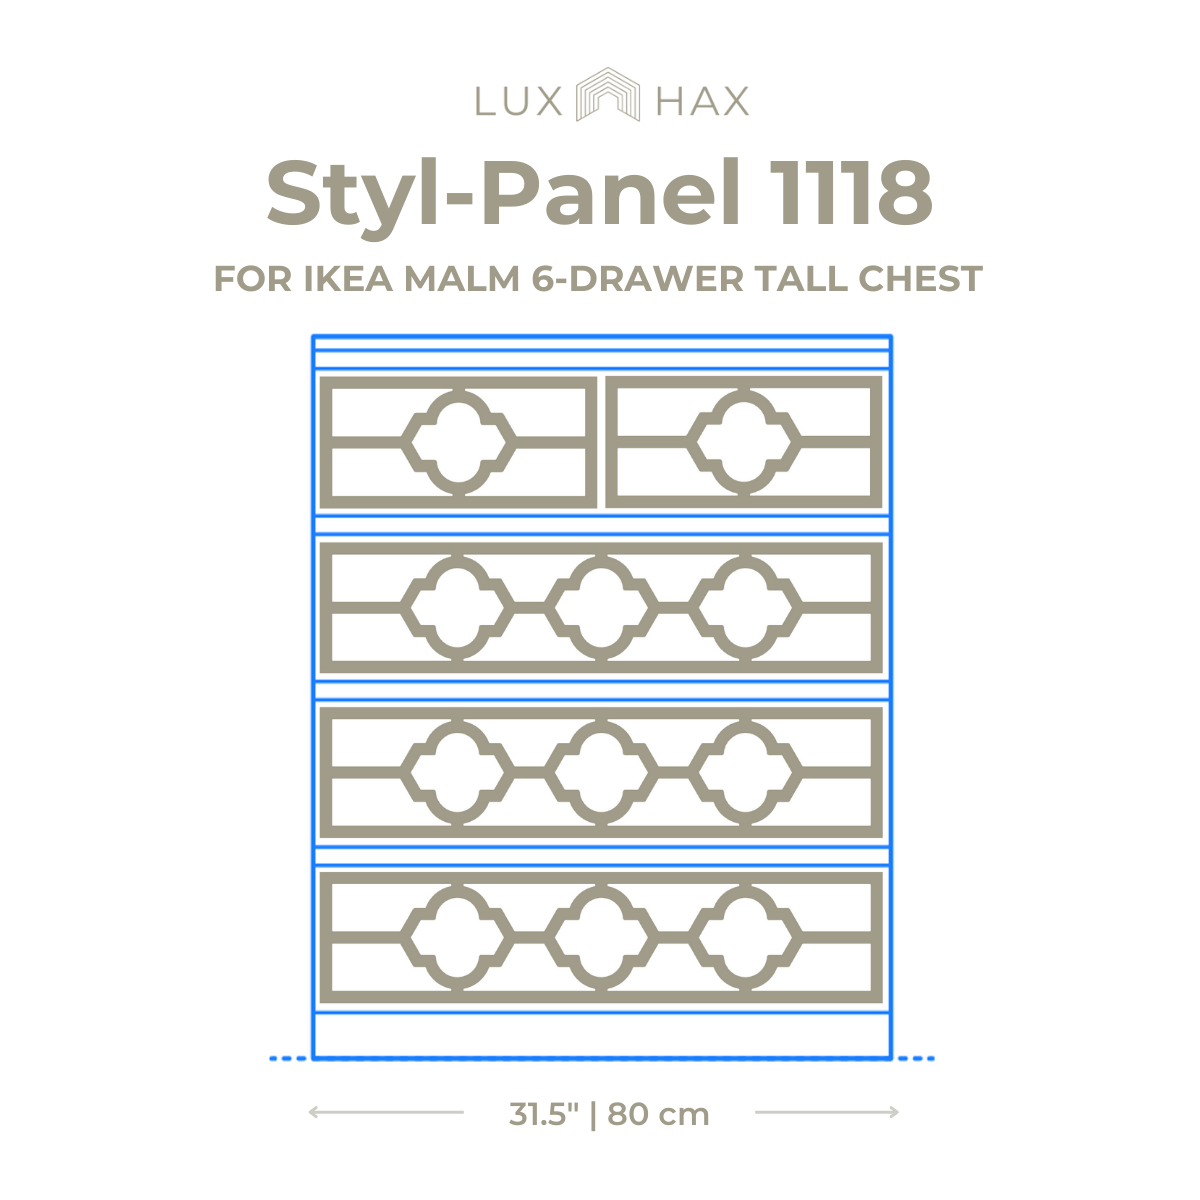 Styl-Panel Kit: #1118 to suit IKEA Malm 3 or 4 or 6-drawer chests - Lux Hax